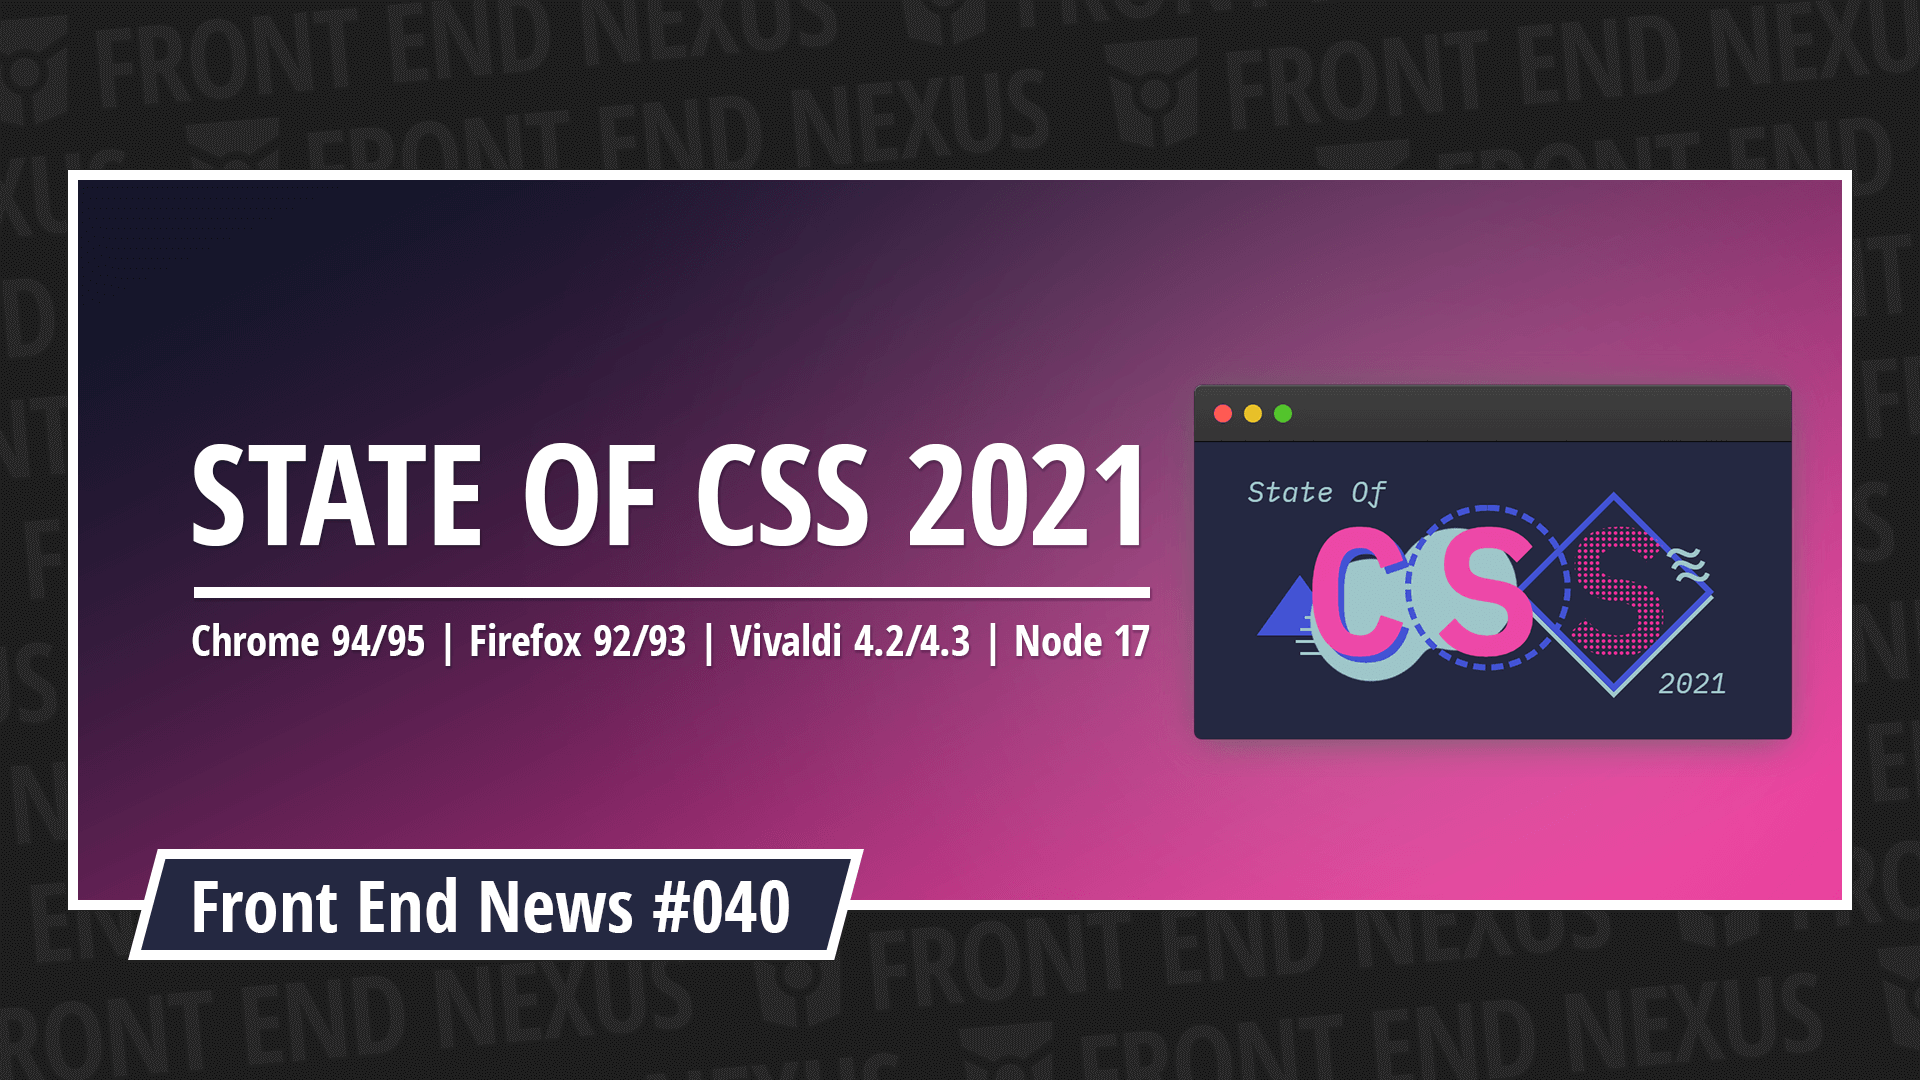 State of CSS 2021, Chrome 94/95, Firefox 92/93, Vivaldi 4.2/4.3, Node 17, and more | Front End News #040